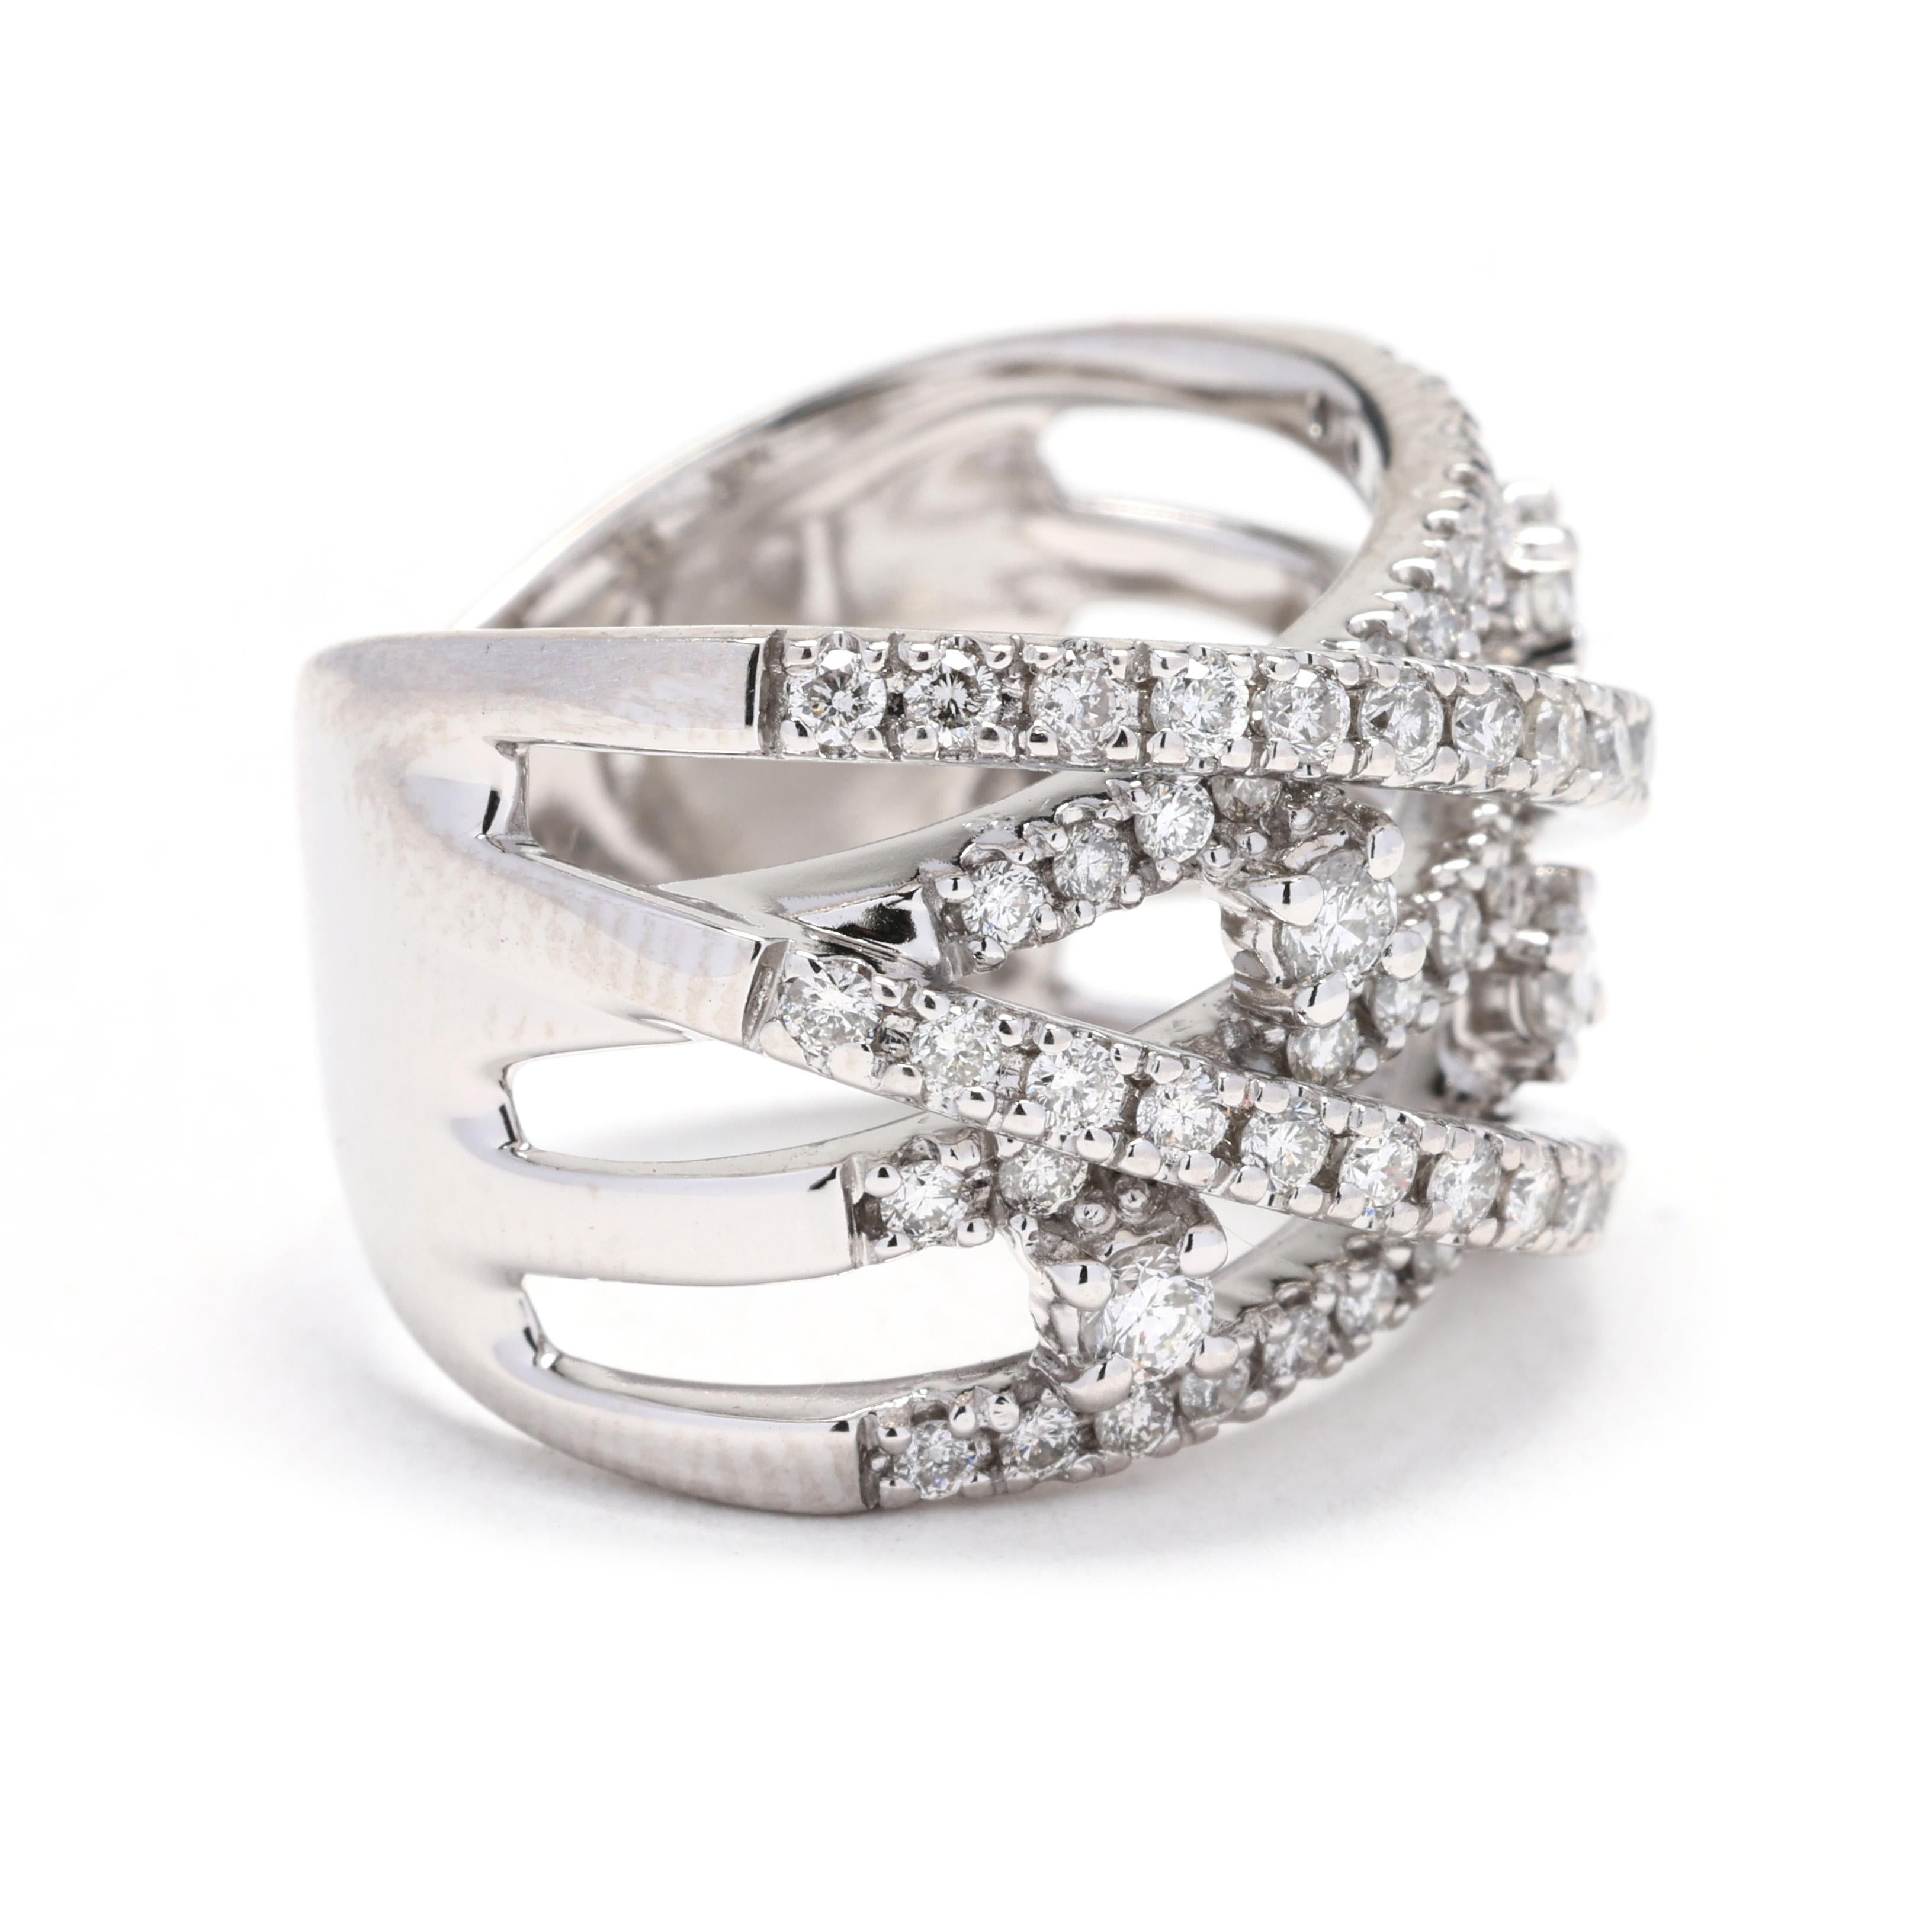 This 1.1 carat total weight diamond twisted thick band is a stunning piece of jewelry. Made from 14k white gold, this ring features a unique twisted design that adds a modern twist to a classic band. The thick band adds extra drama and presence to